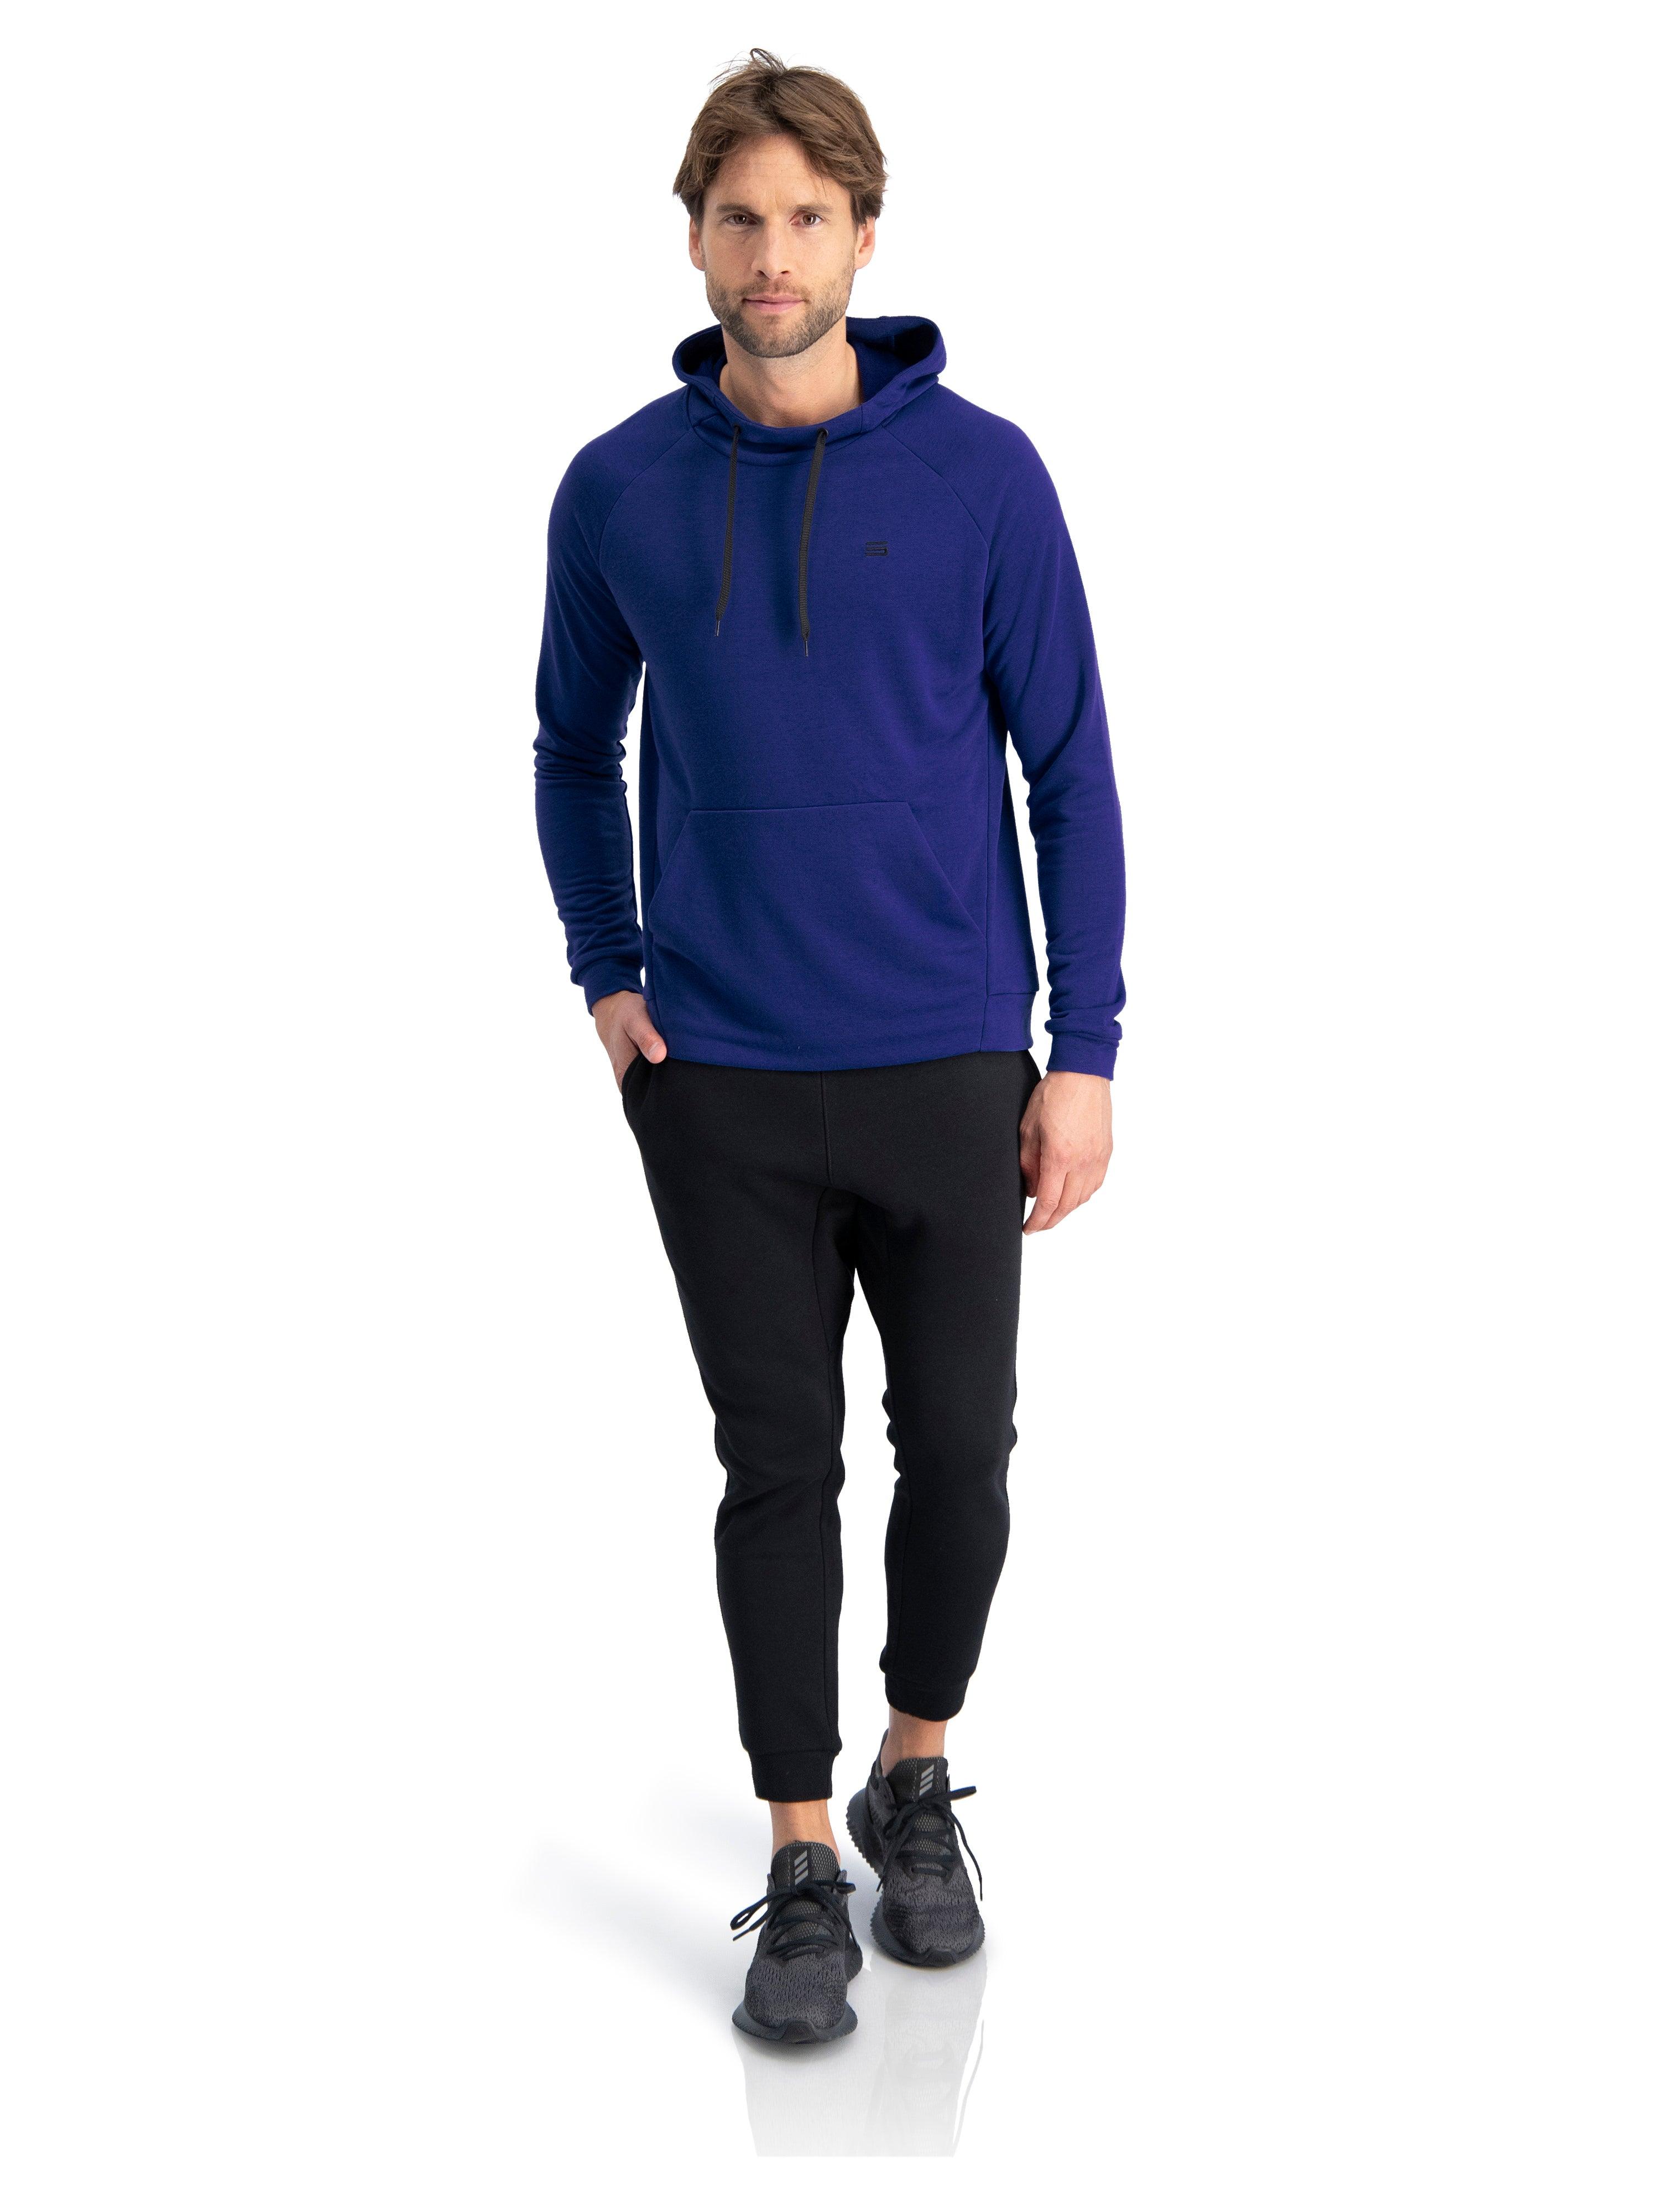 Three Sixty Six Dry Fit Mens Hoodies Pullover - Workout Sweatshirts for Men  w/Adjustable Hoodie